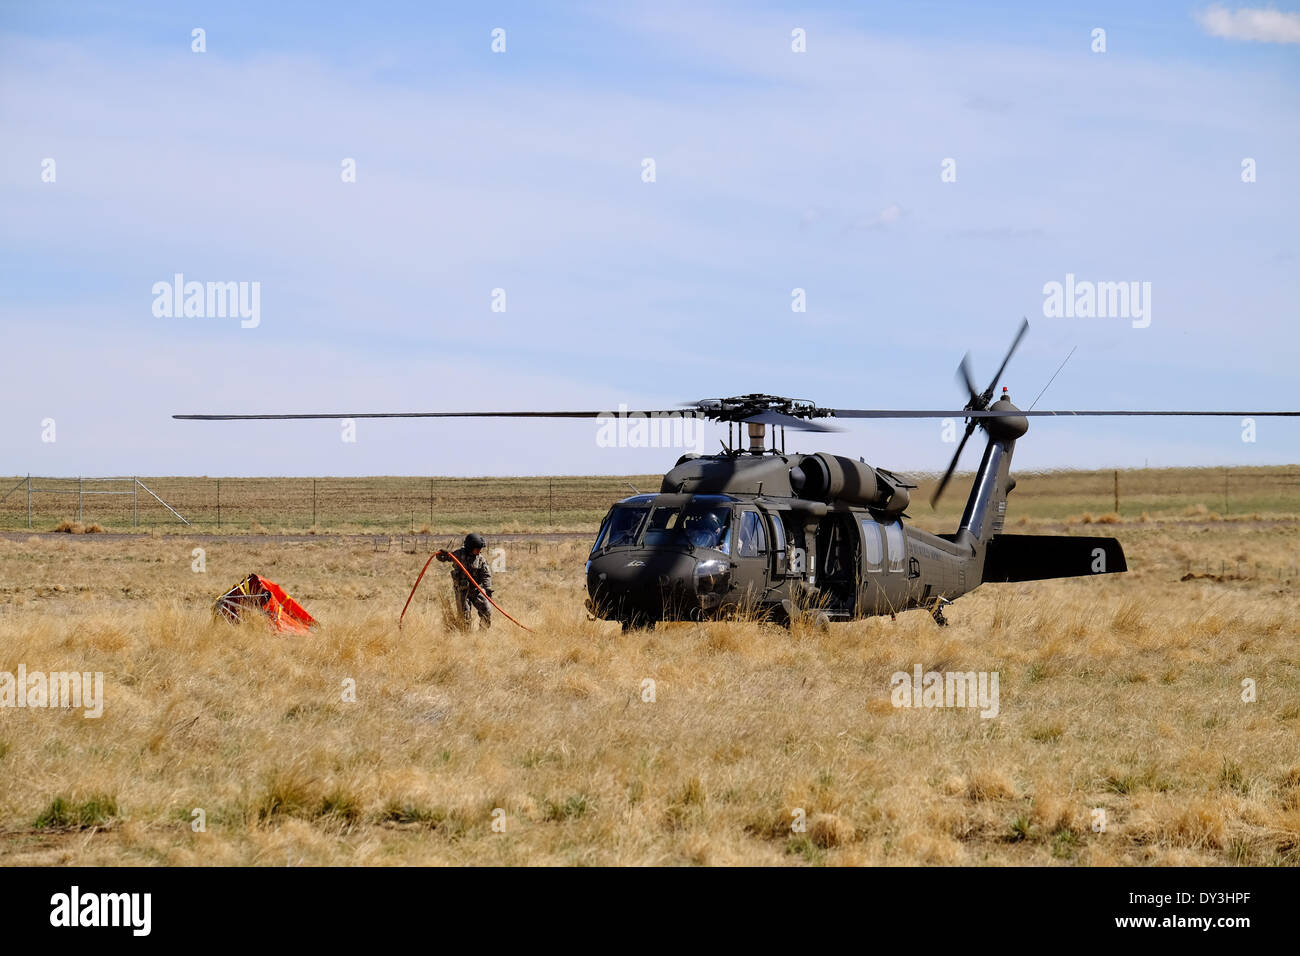 Commerce City, Colorado USA - 5th April 2014. Members of the Colorado National Guard 2nd Battalion, 135th General Support Aviation Brigade based out of Buckley Air Force Base in Aurora, Colorado land their helicopter after practicing their communication and bucket drop techniques at The Rocky Mountain Arsenal National Wildlife Refuge in preparation for Colorado’s upcoming fire season. This is the first year that firefighters on the ground are able to communicate with those in the air to coordinate the firefighting effort. Credit:  Ed Endicott/Alamy Live News Stock Photo